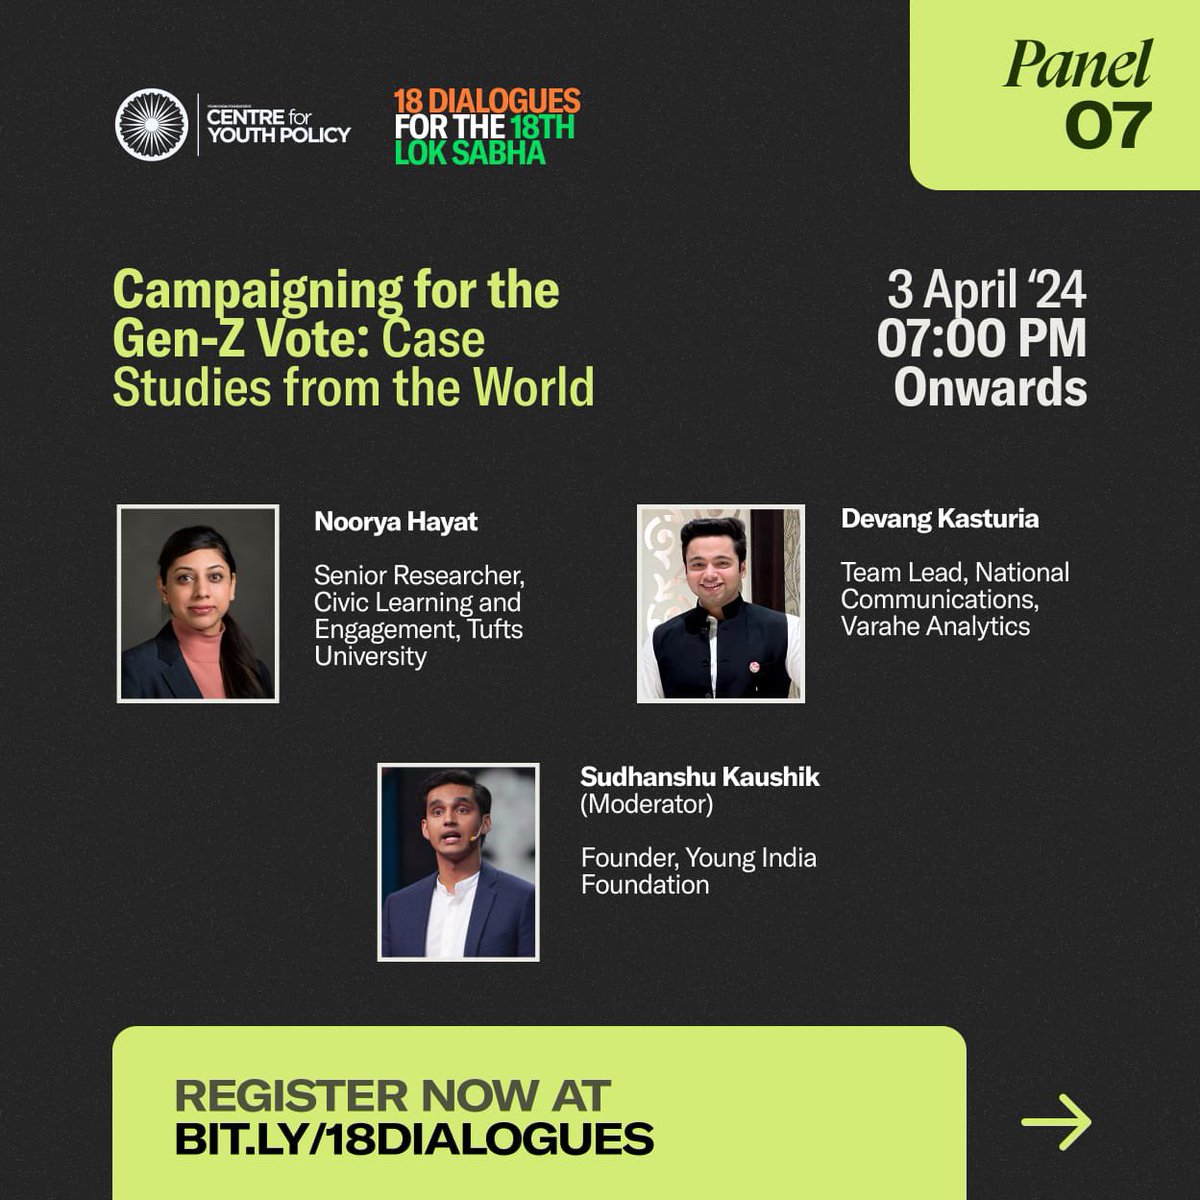 India has the largest Gen-Z vote and the the Gen-Z in the United States have played a huge role in how politicians campaign. Excited to learn from @CivicYouth + @DevangKasturia about the nuances of campaign on for the Gen-Z vote! docs.google.com/forms/d/e/1FAI…